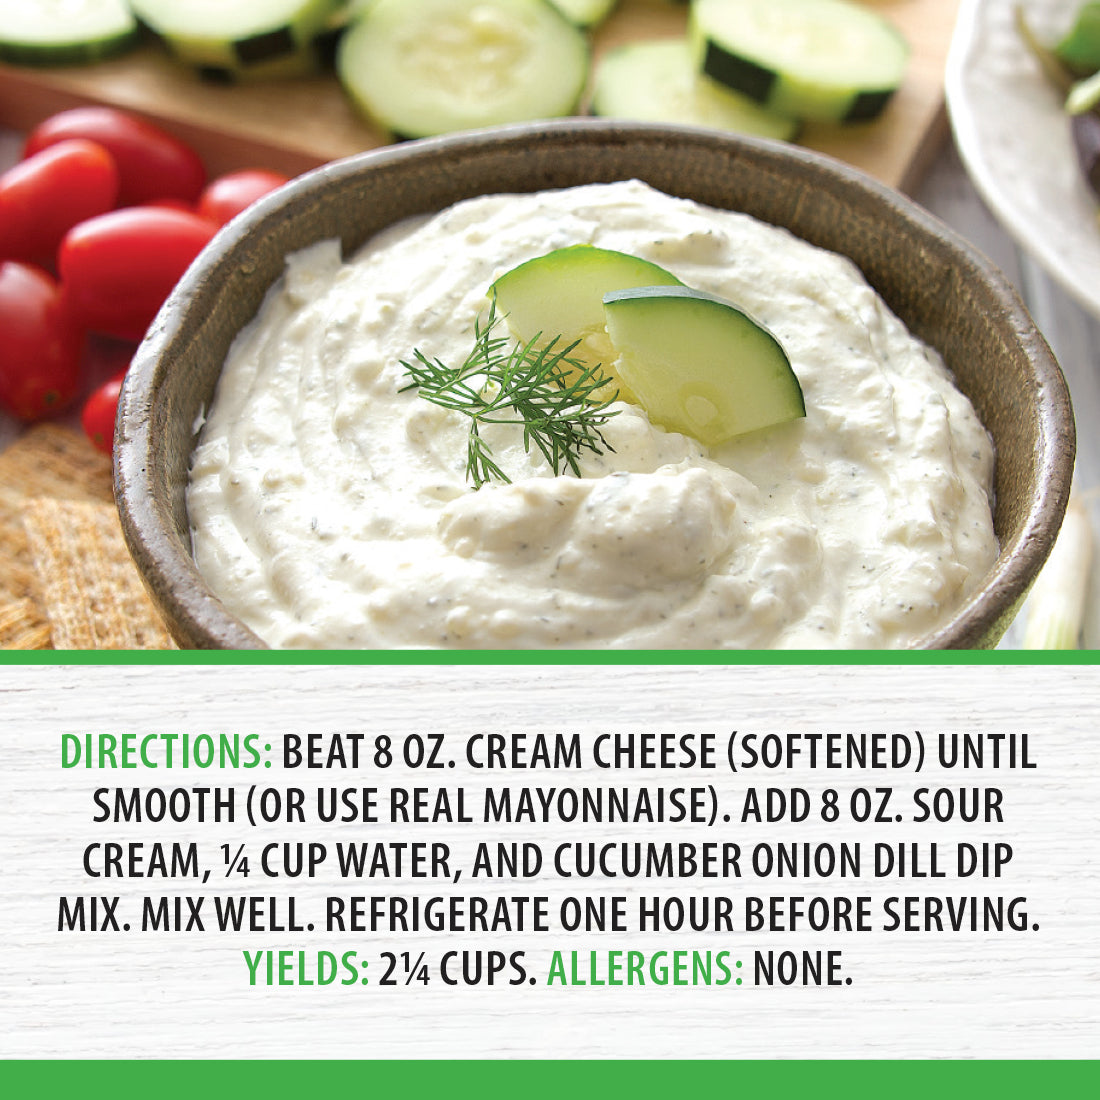 A bowl of Cucumber Onion Dill Dip next to crackers, cucumbers, and cherry tomatoes.